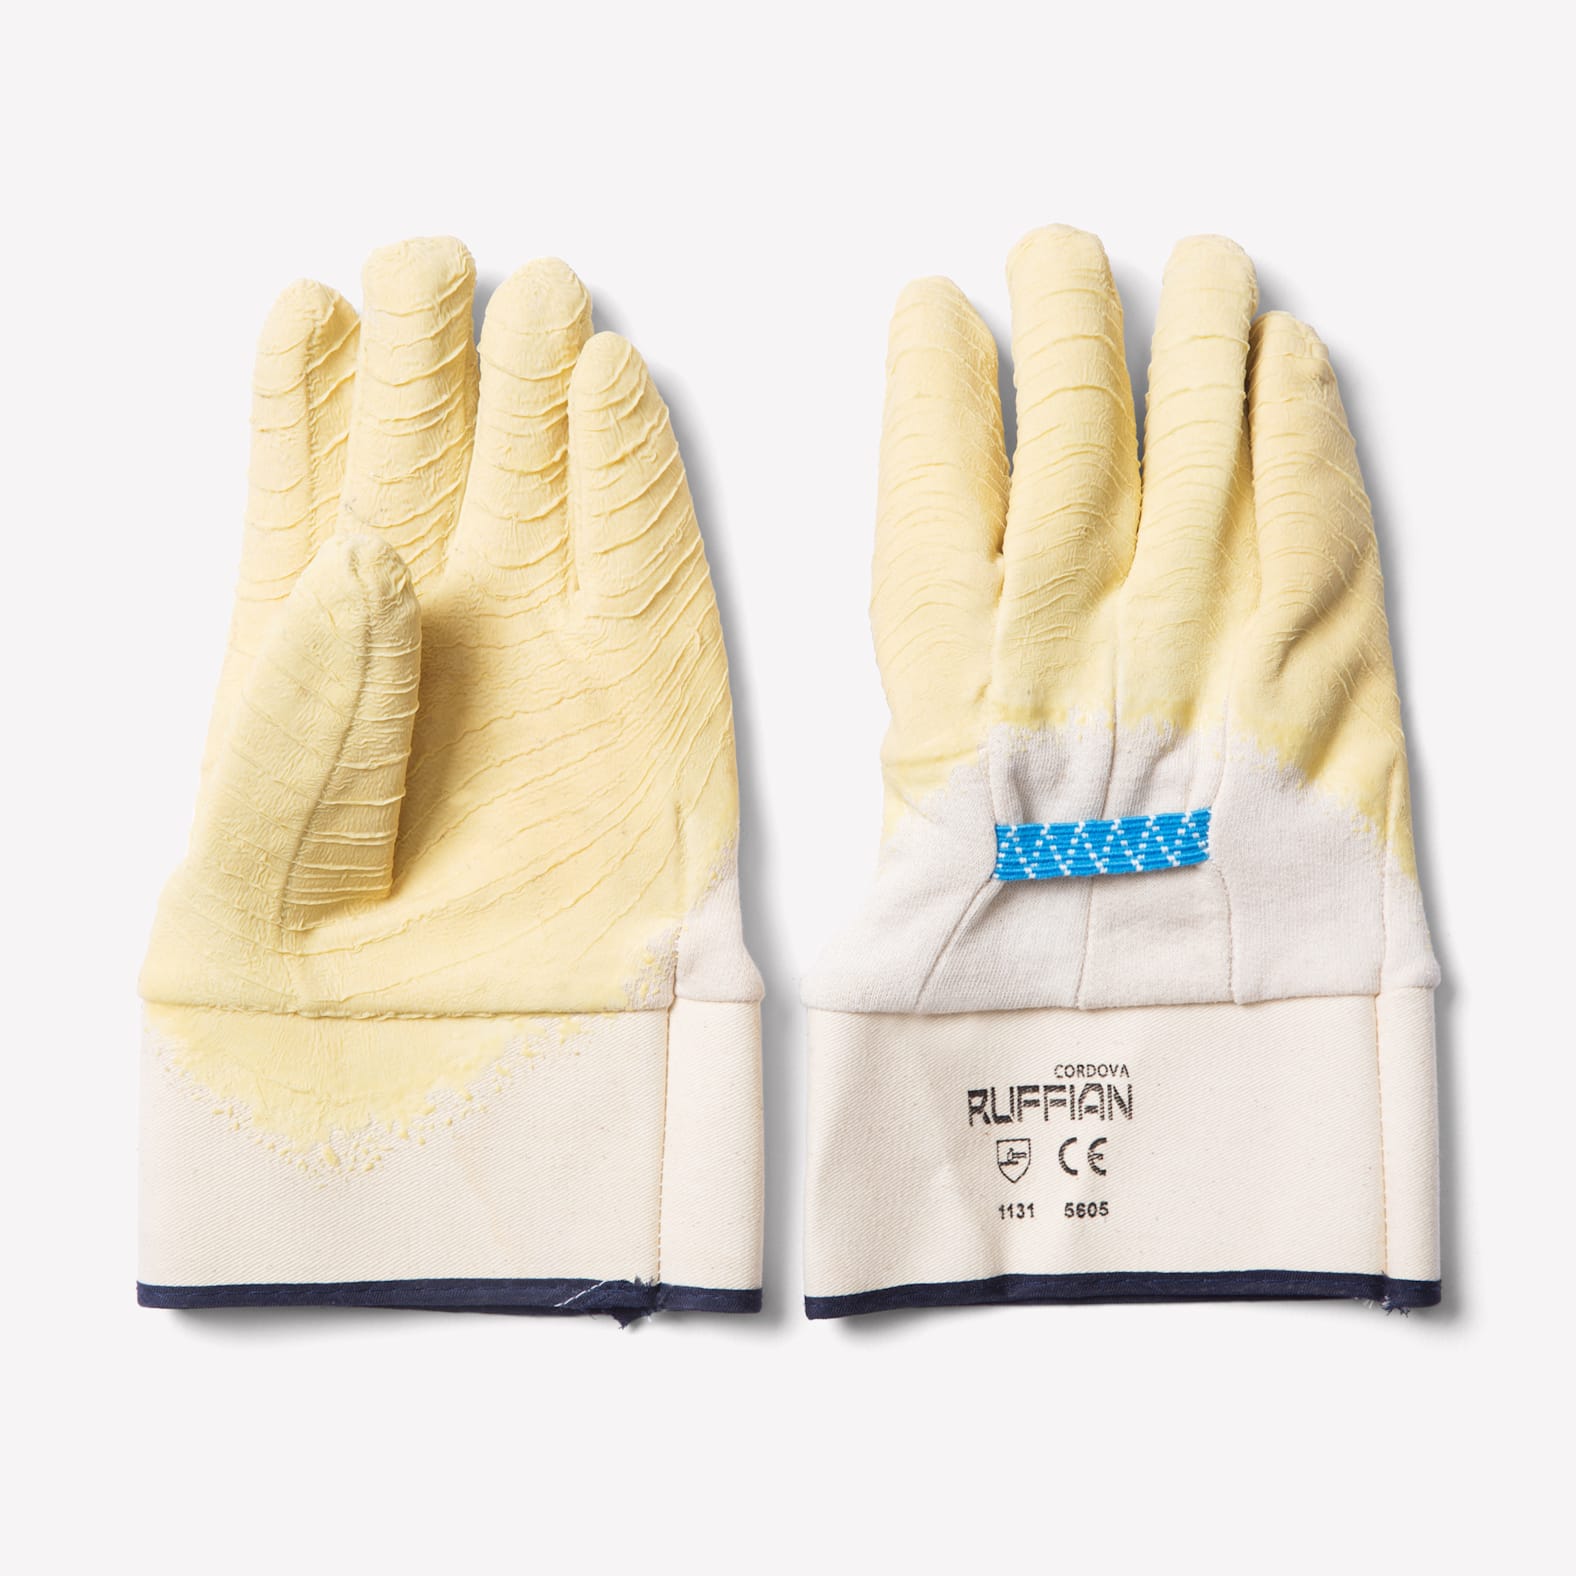 Yellow Rubber Oyster Shucking Gloves, Pair